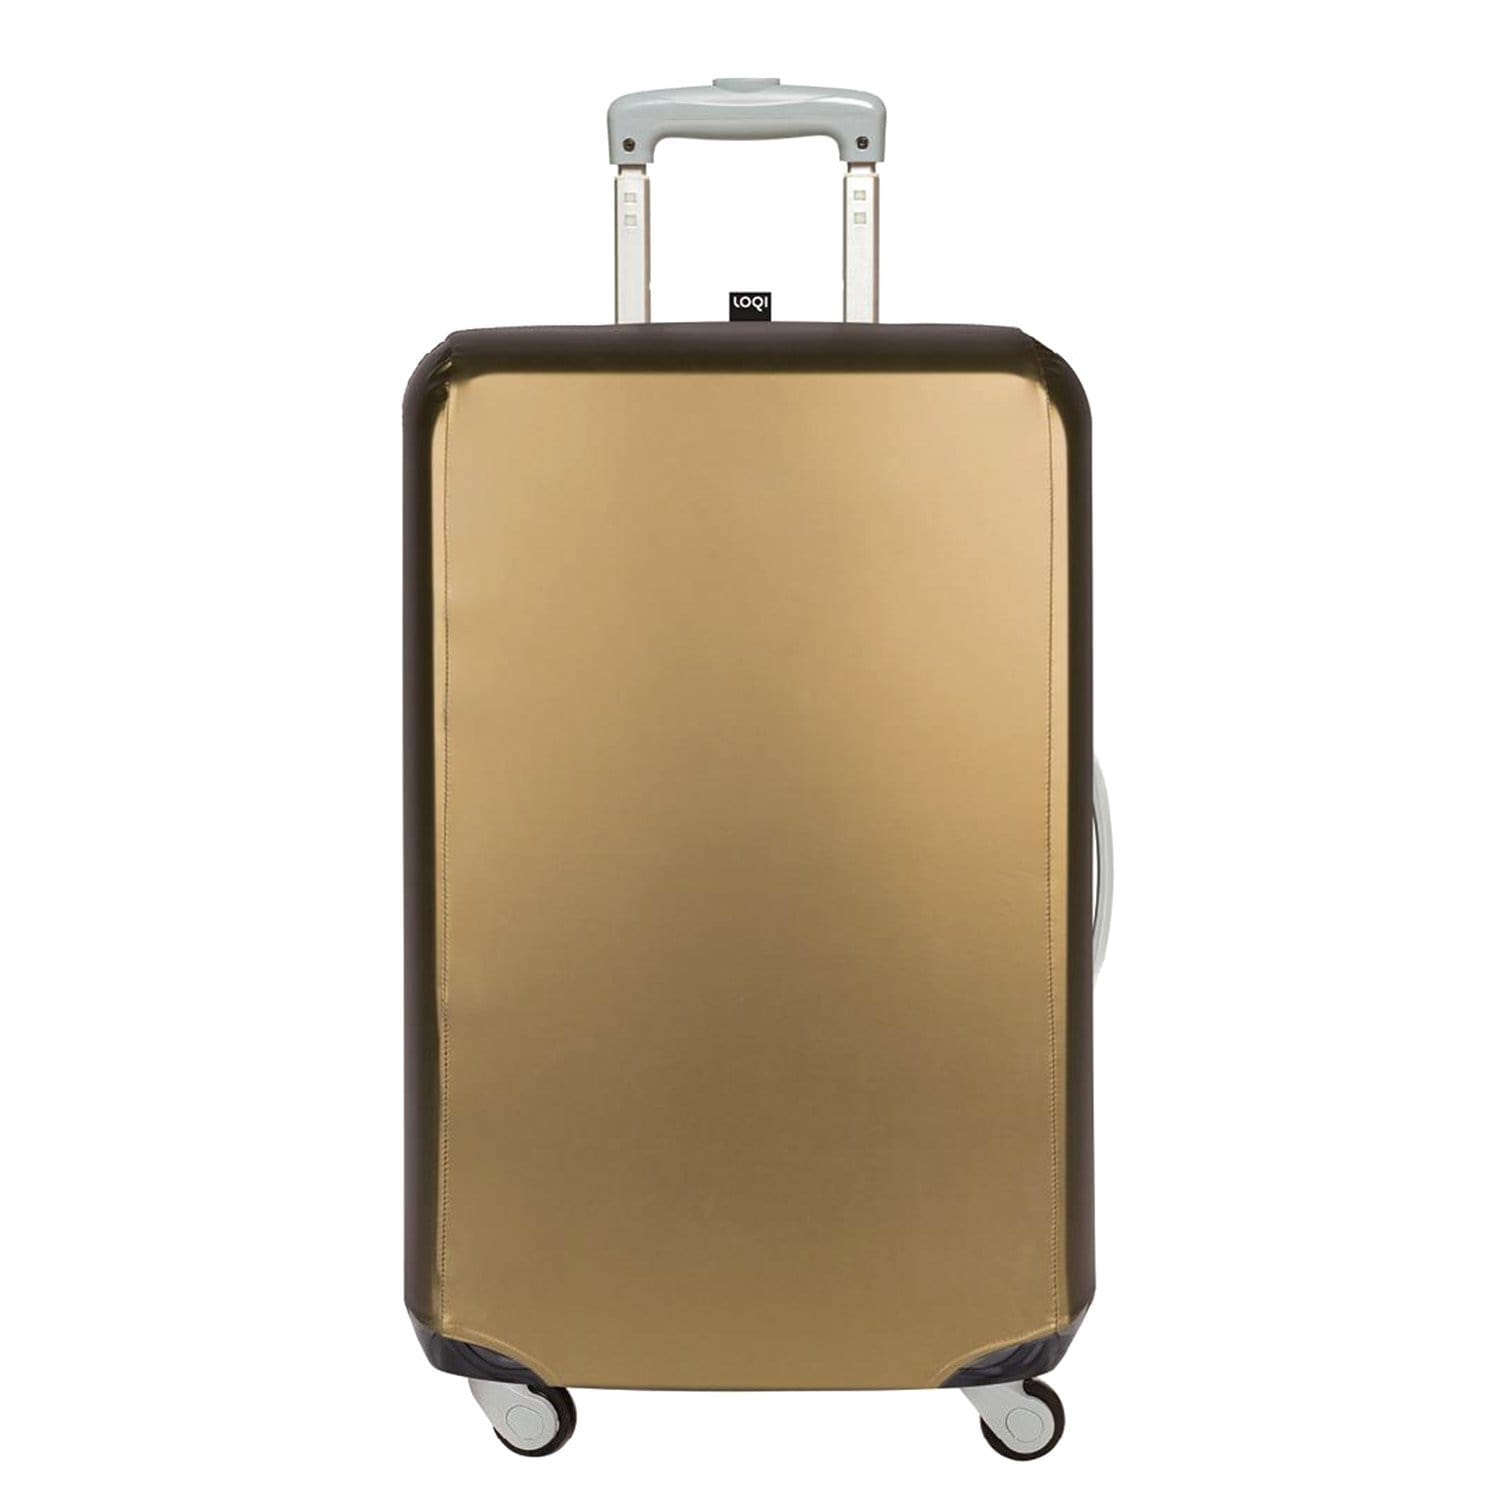 Loqi Luggage Cover - Metallic Gold, Small - LS.ME.GO - Jashanmal Home